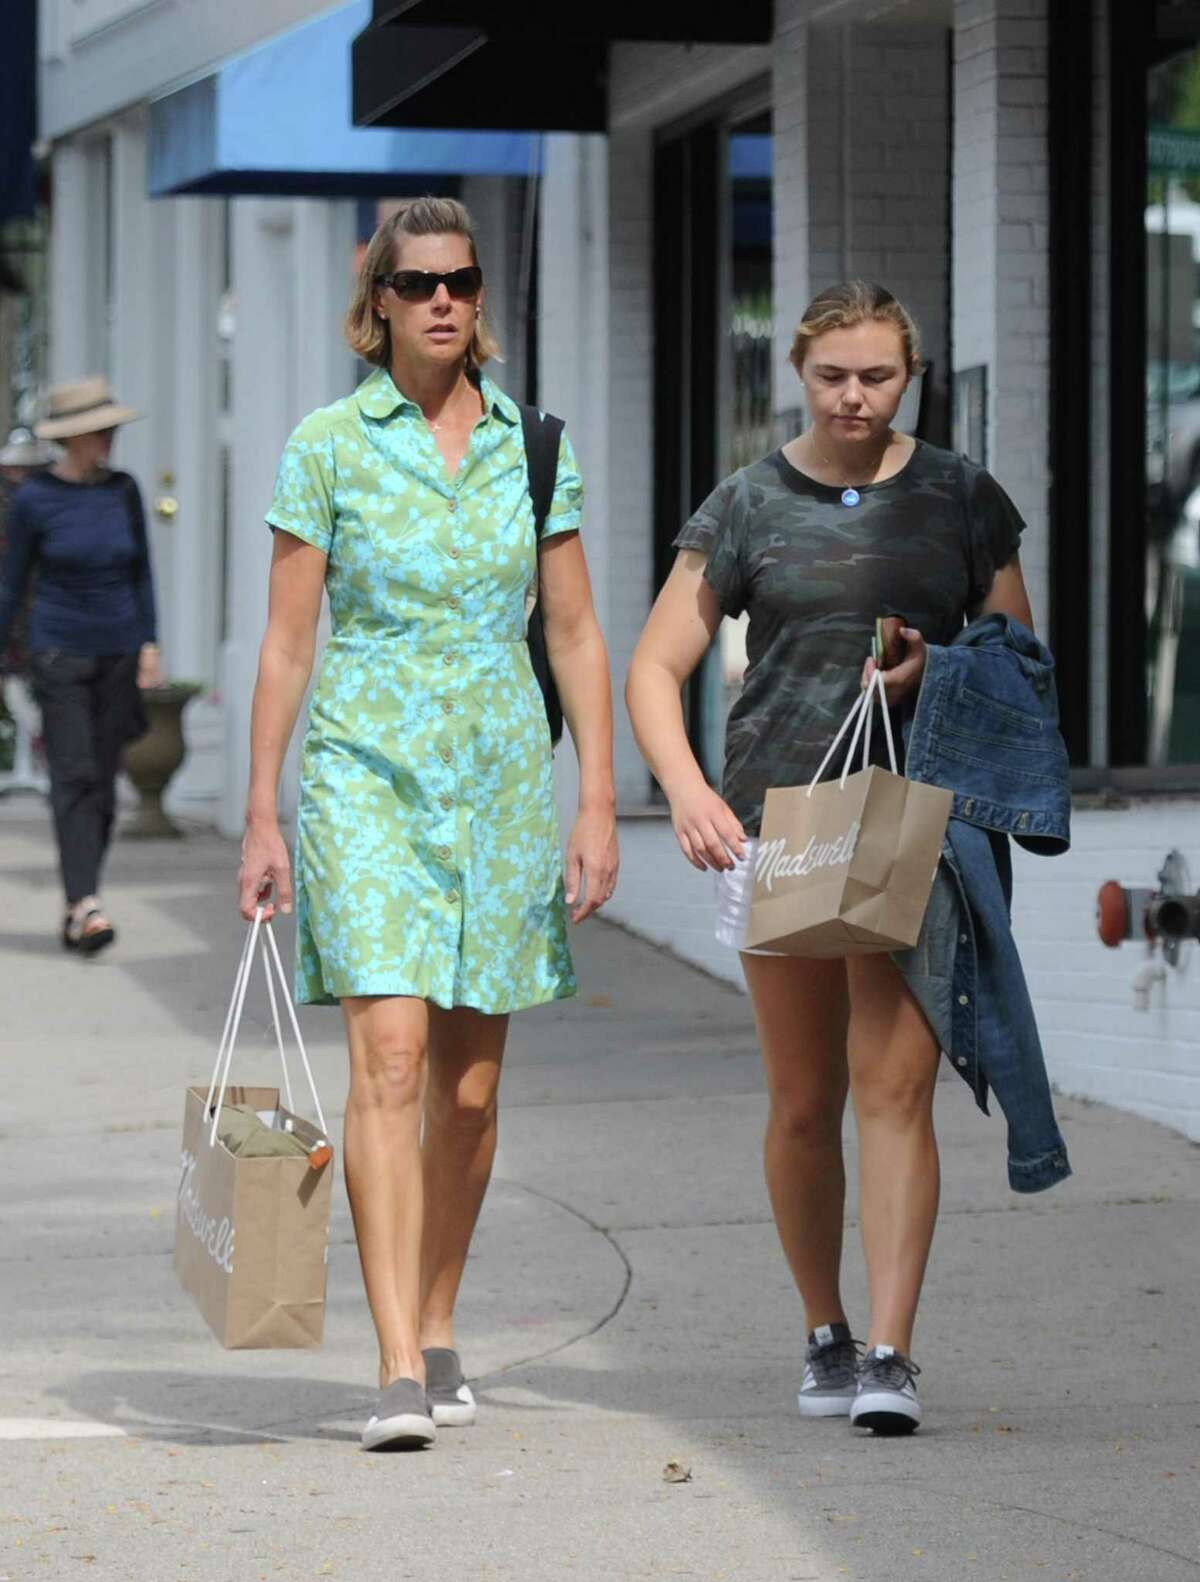 Women carry their shopping items in paper bags down Greenwich Avenue in Greenwich, Conn. Wednesday, Sept. 19, 2018. Stores and customers have had mixed reactions since the plastic bag ban was implemented in Greenwich on Wednesday Sept. 12.